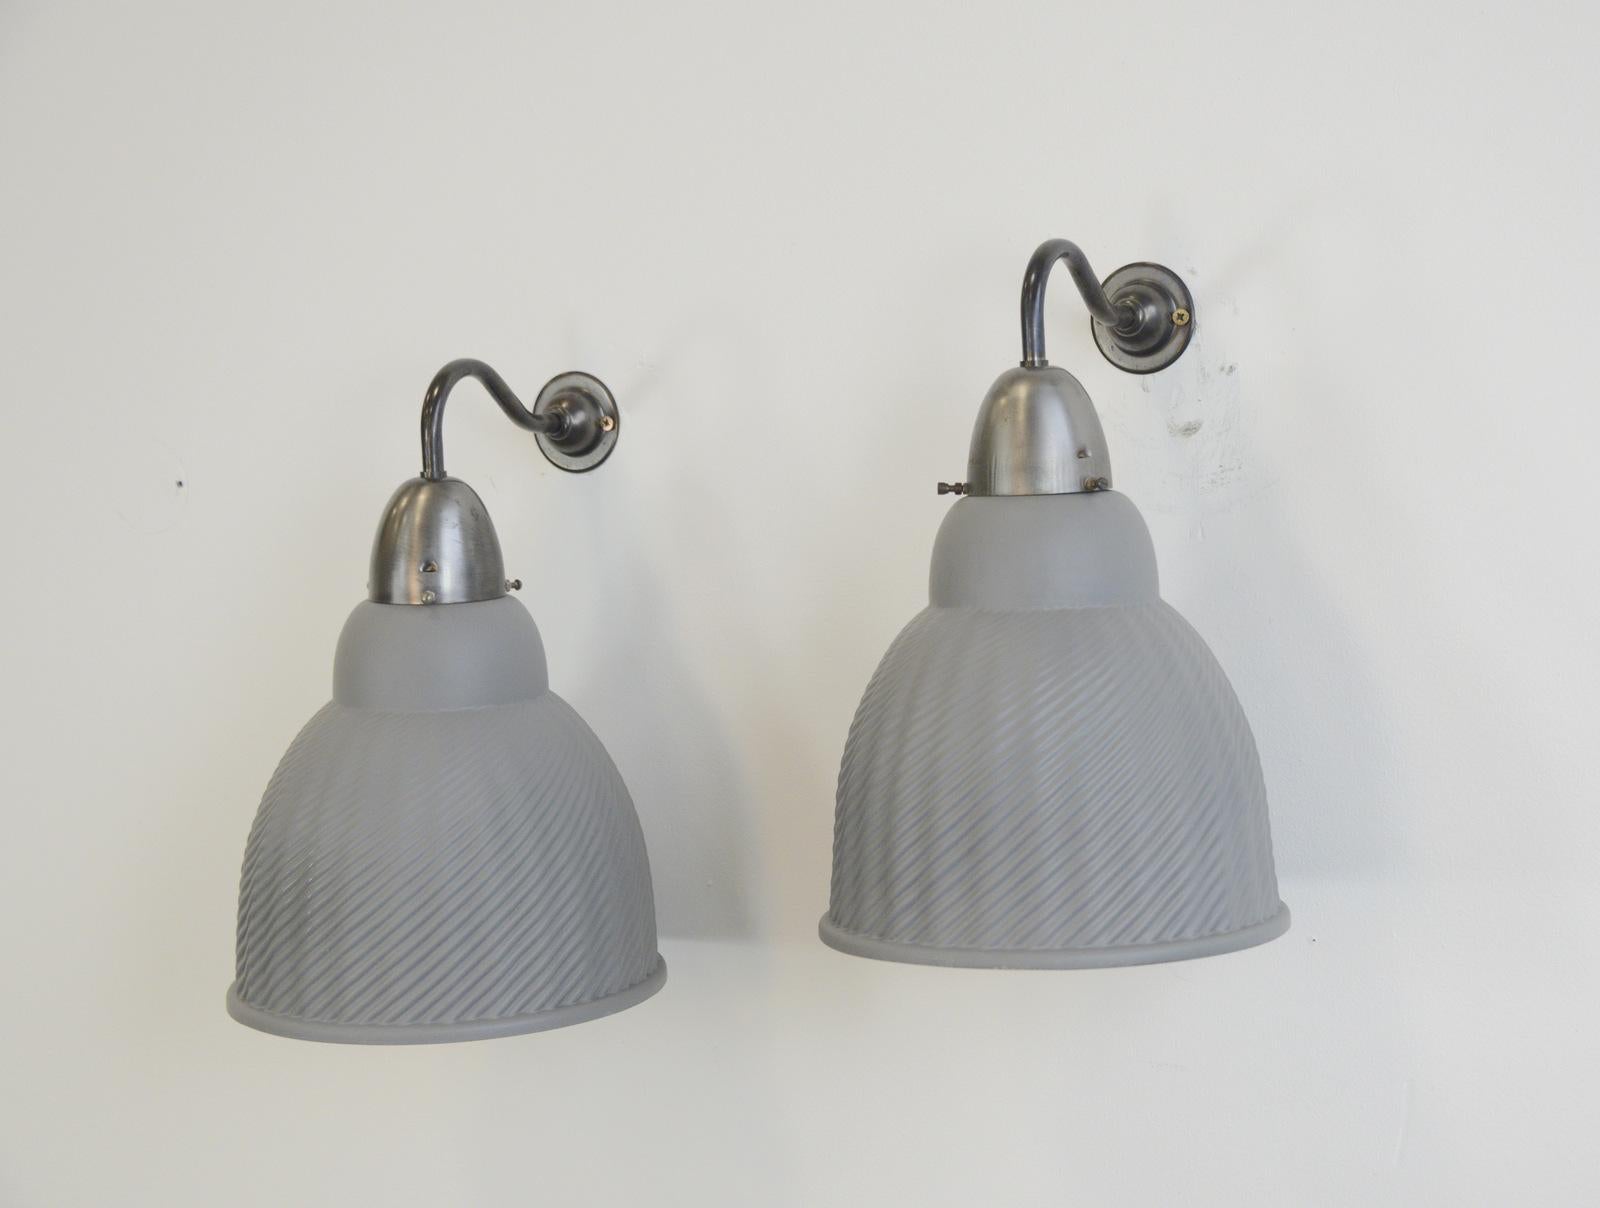 Large mercury glass wall lights, circa 1930s

- Price is per lamp
- Grey outer paint
- Mercury glass inner
- Takes E27 fitting bulbs
- Wires directly into the wall
- Czech ~ 1930s
- Measures: 40cm tall x 27cm wide x 27cm deep

Condition